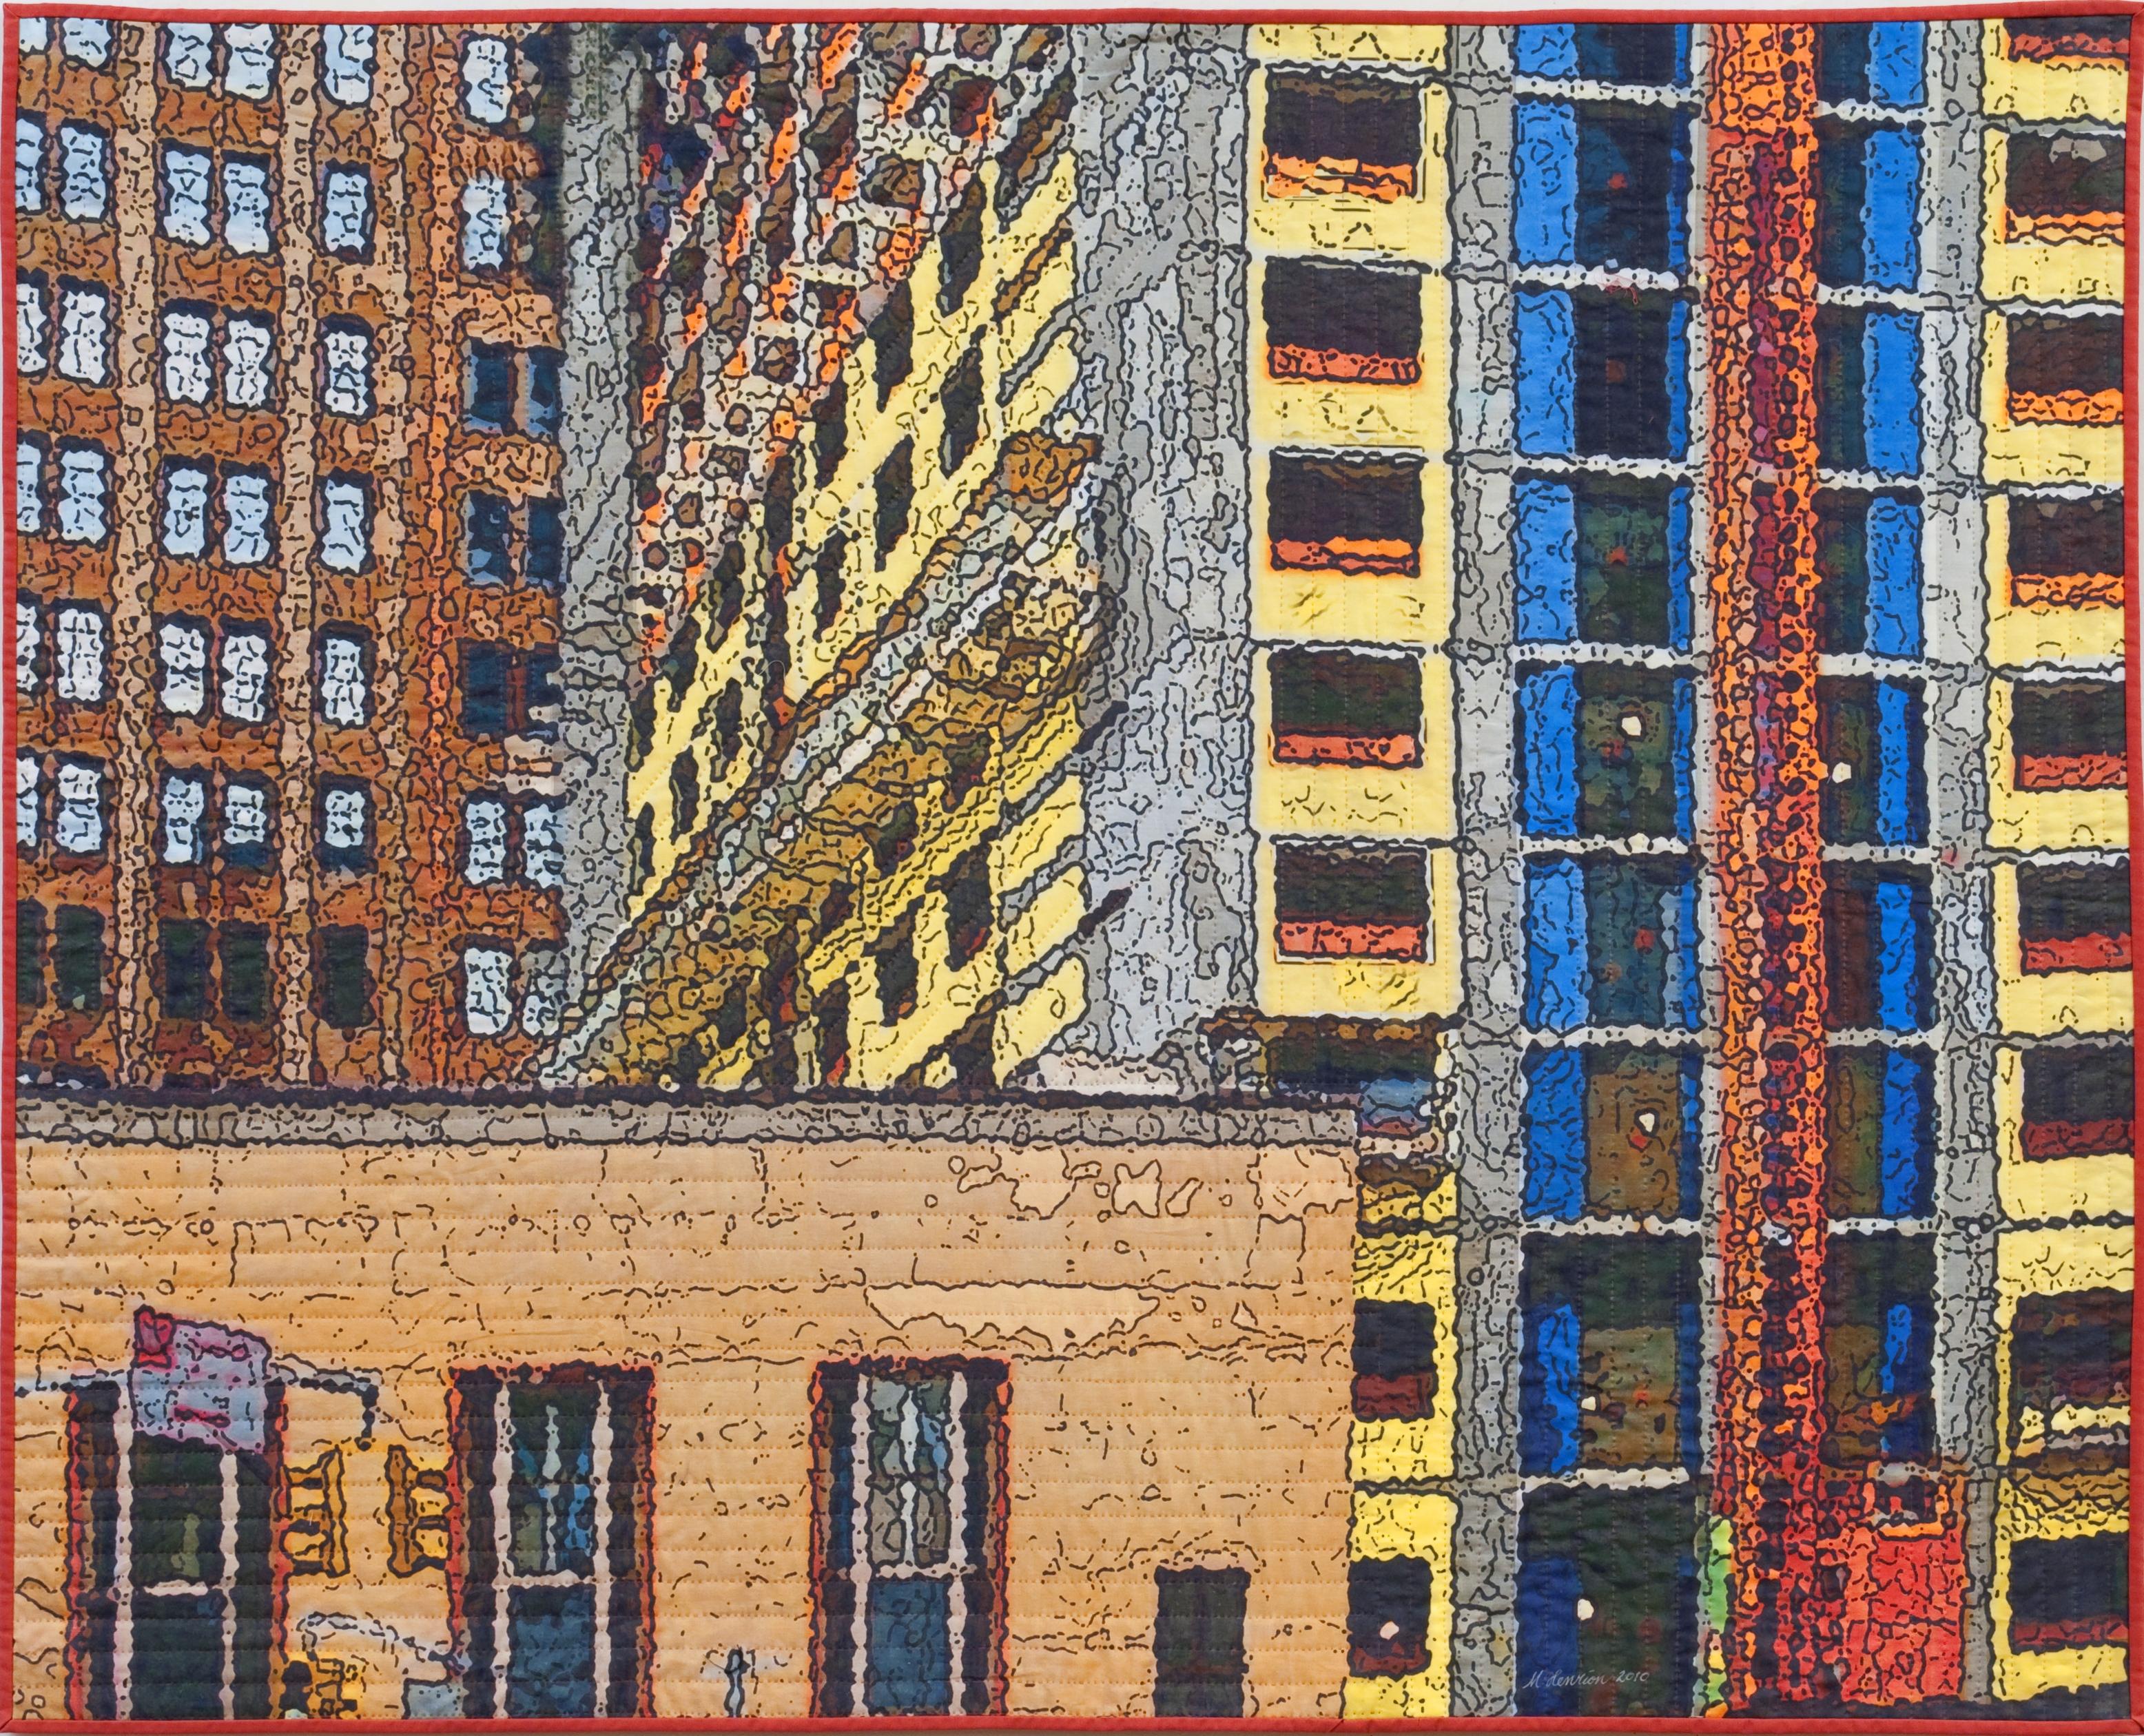 Soft City: Canal Street Construction, Mixed Media on Other - Mixed Media Art by Marilyn Henrion